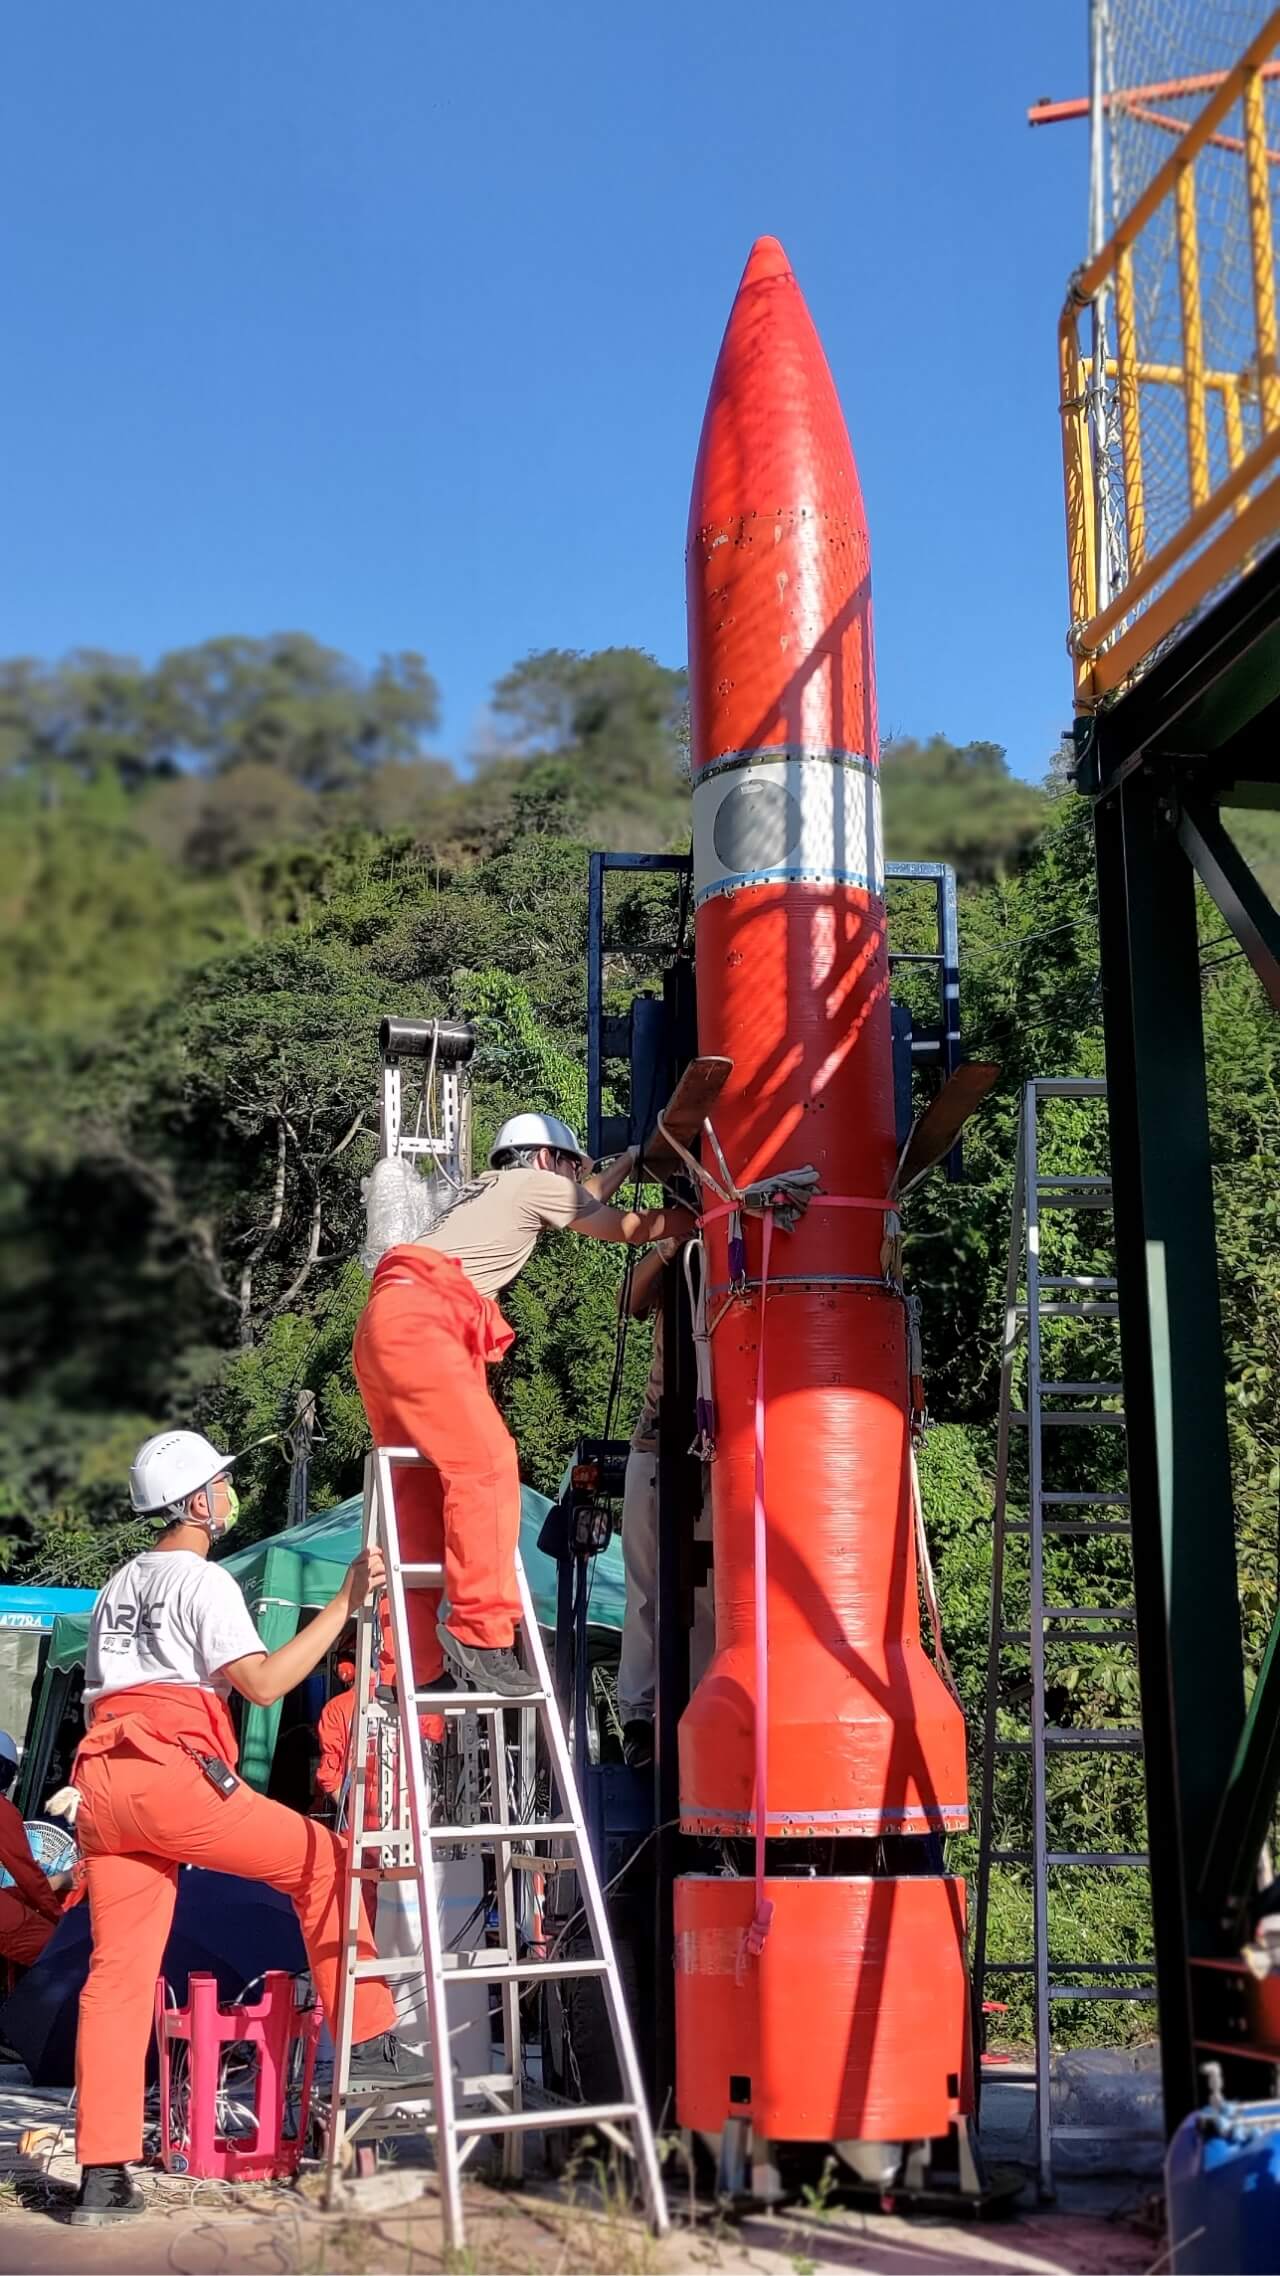 ARRC Successfully Completes the Long Awaited Vertical Hotfire Test of the HTTP-3A S2 Rocket